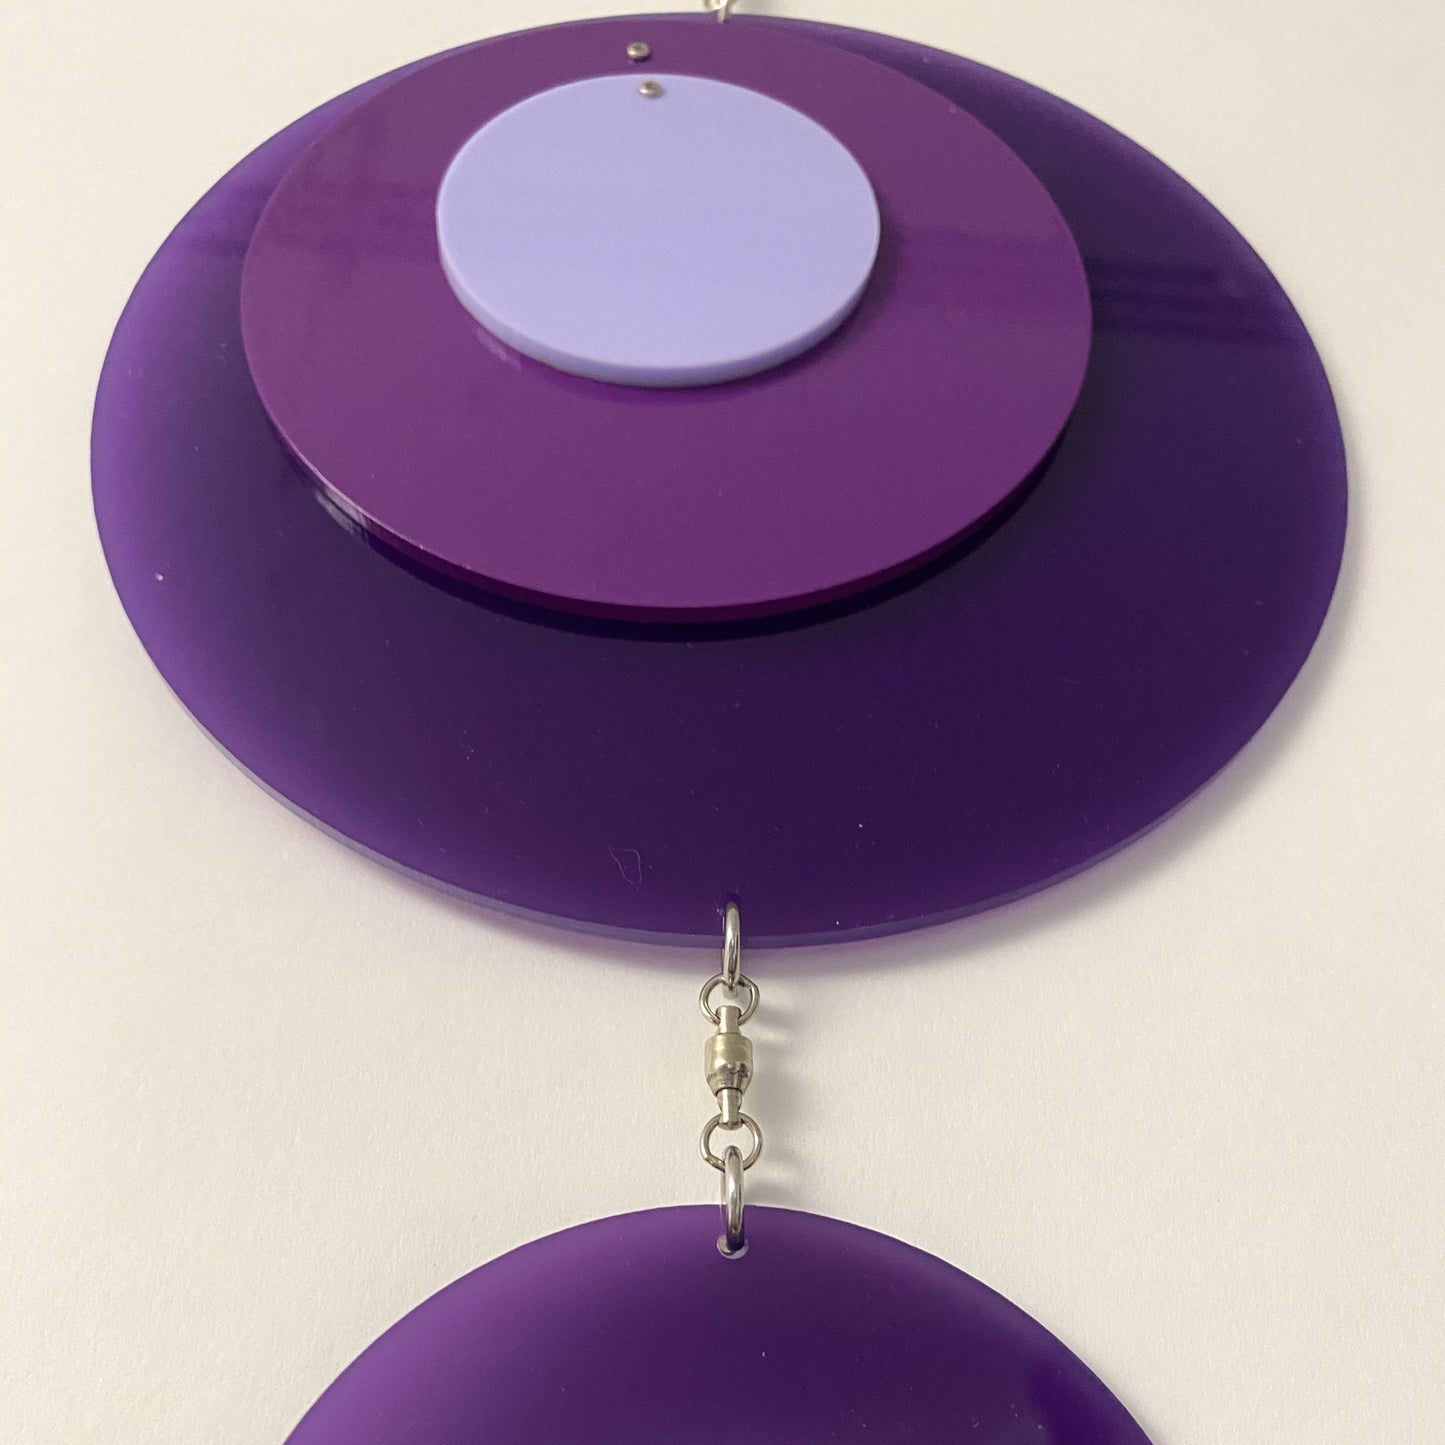 Retro 1970s vertical kinetic art mobile in purple circle DOTS ready to ship today by AtomicMobiles.com